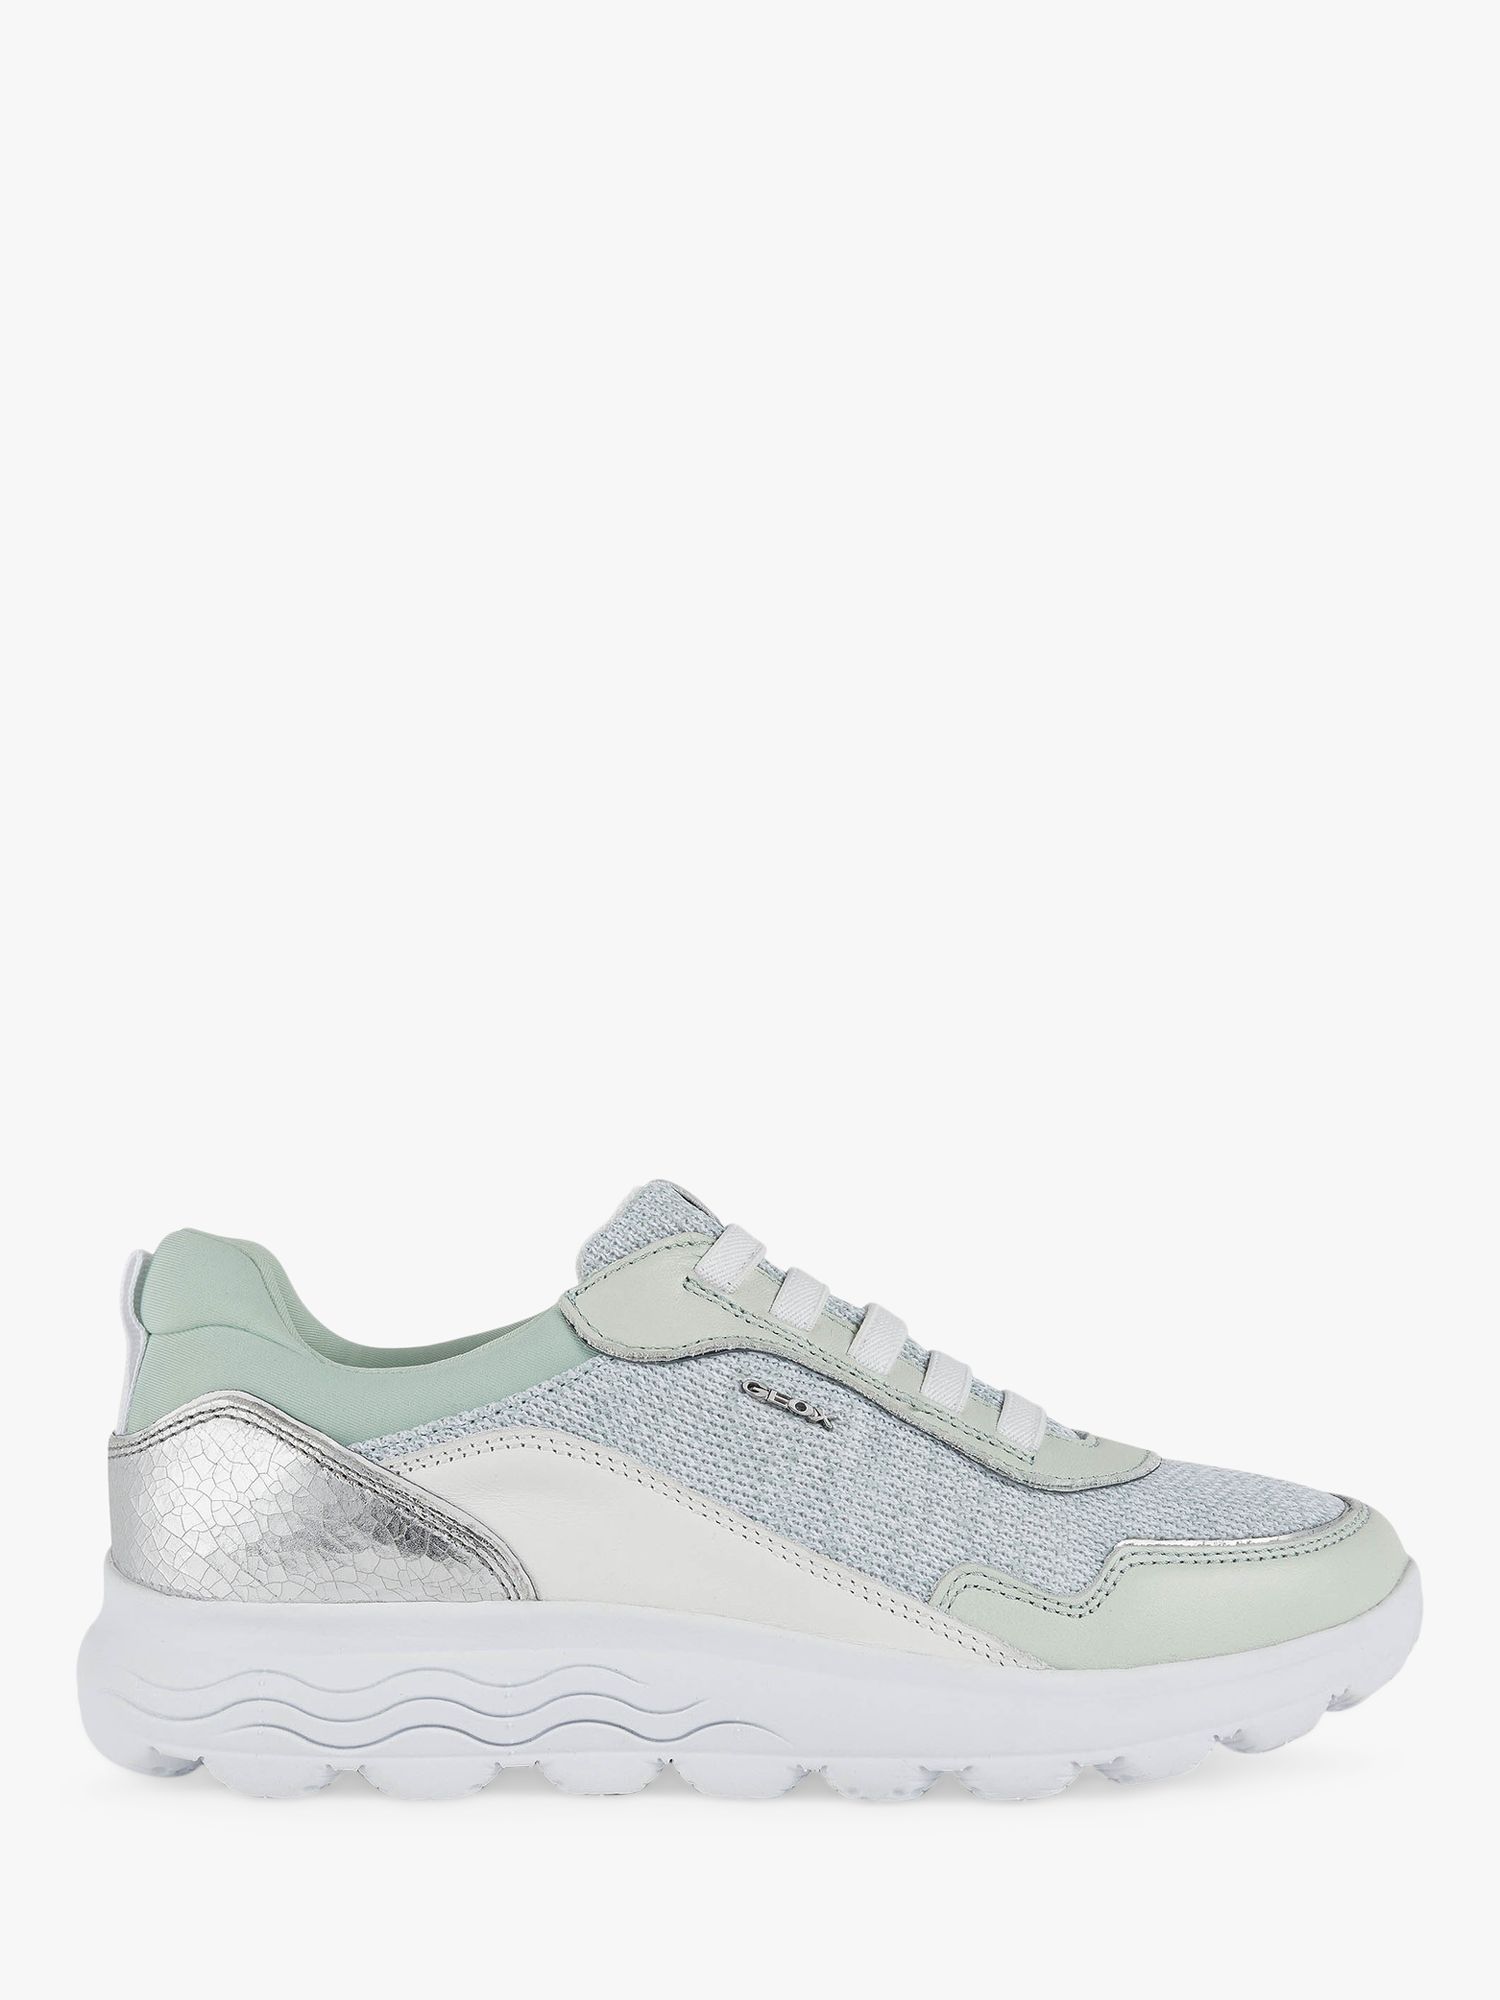 Geox Women's Spherica Metallic Detail Lace Up Trainers, Mint/White at Lewis Partners